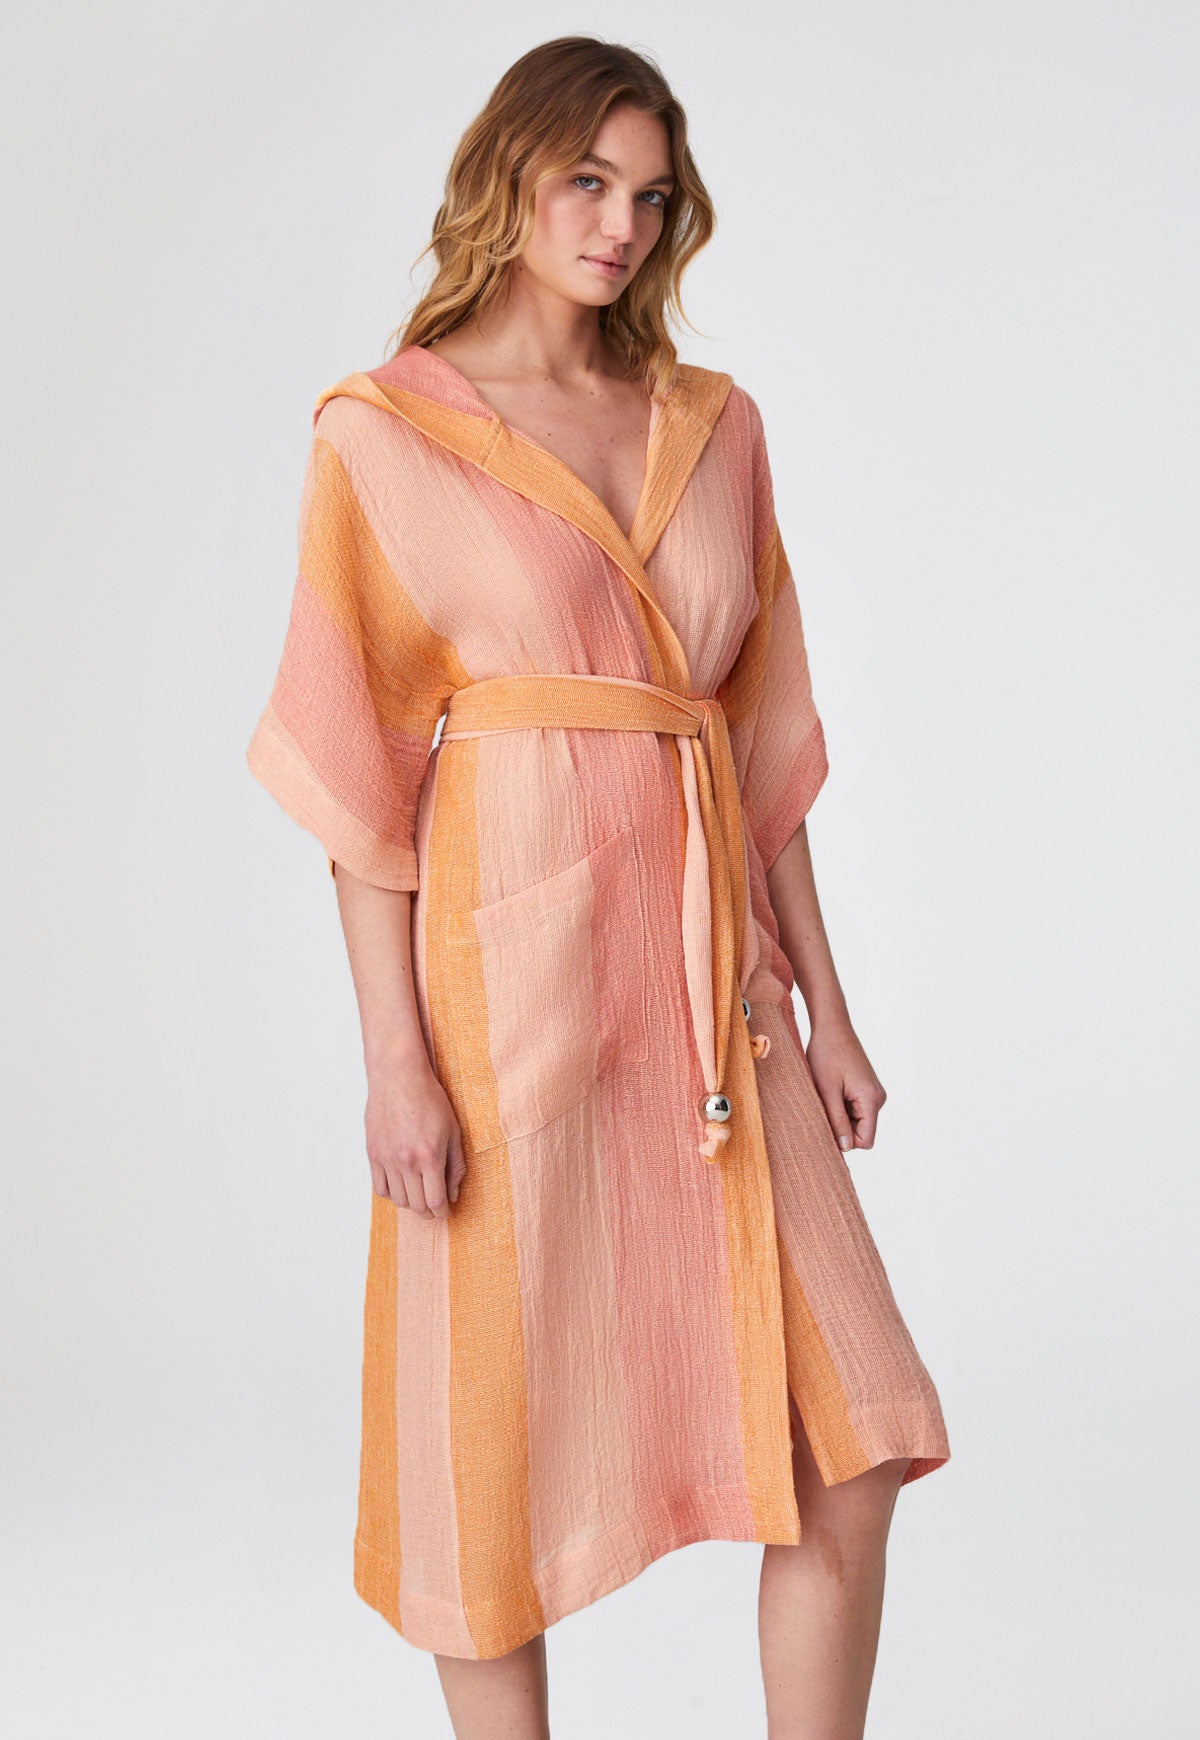 THE DRESSING GOWN in SUNSET AWNING STRIPED GAUZE